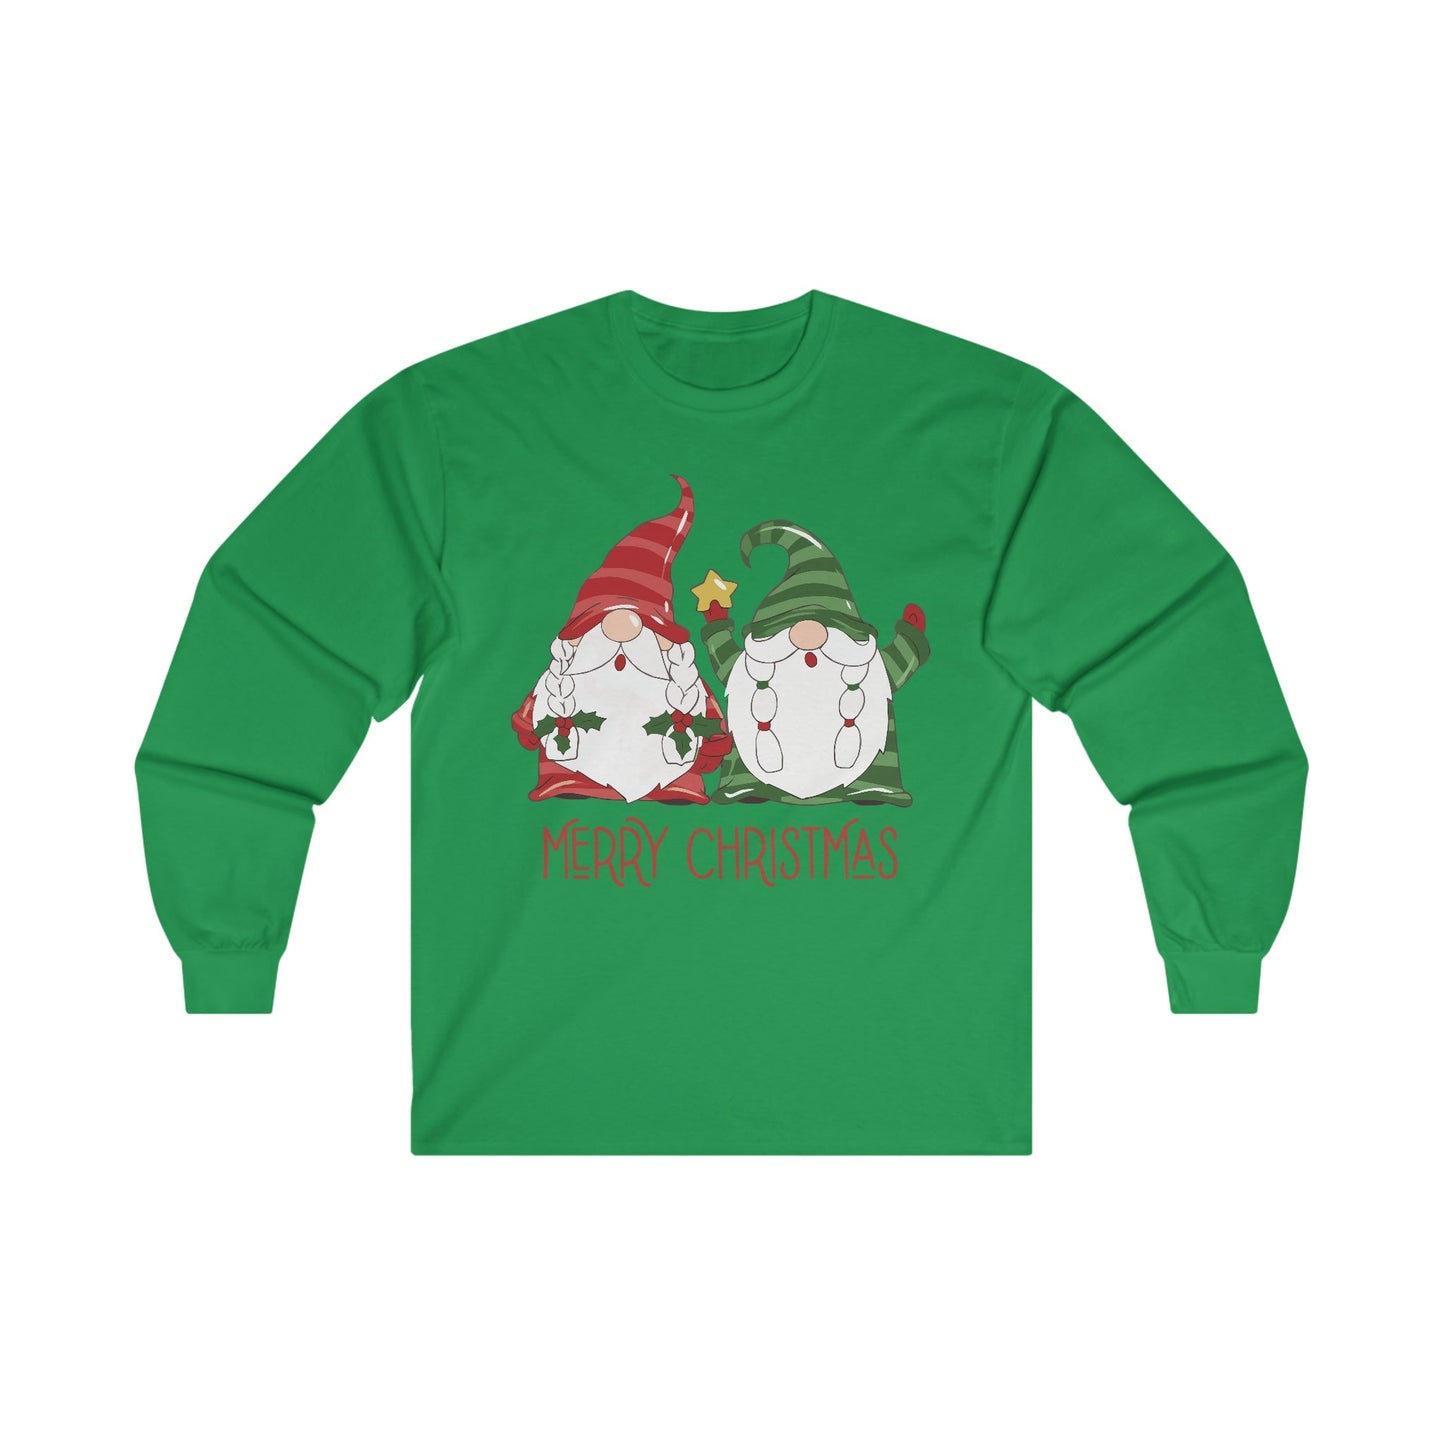 Christmas Long Sleeve T-Shirt - Gnome Merry Christmas - Cute Christmas Shirts - Youth and Adult Christmas Long Sleeve TShirts Long Sleeve T-Shirts Graphic Avenue Green Adult Small 